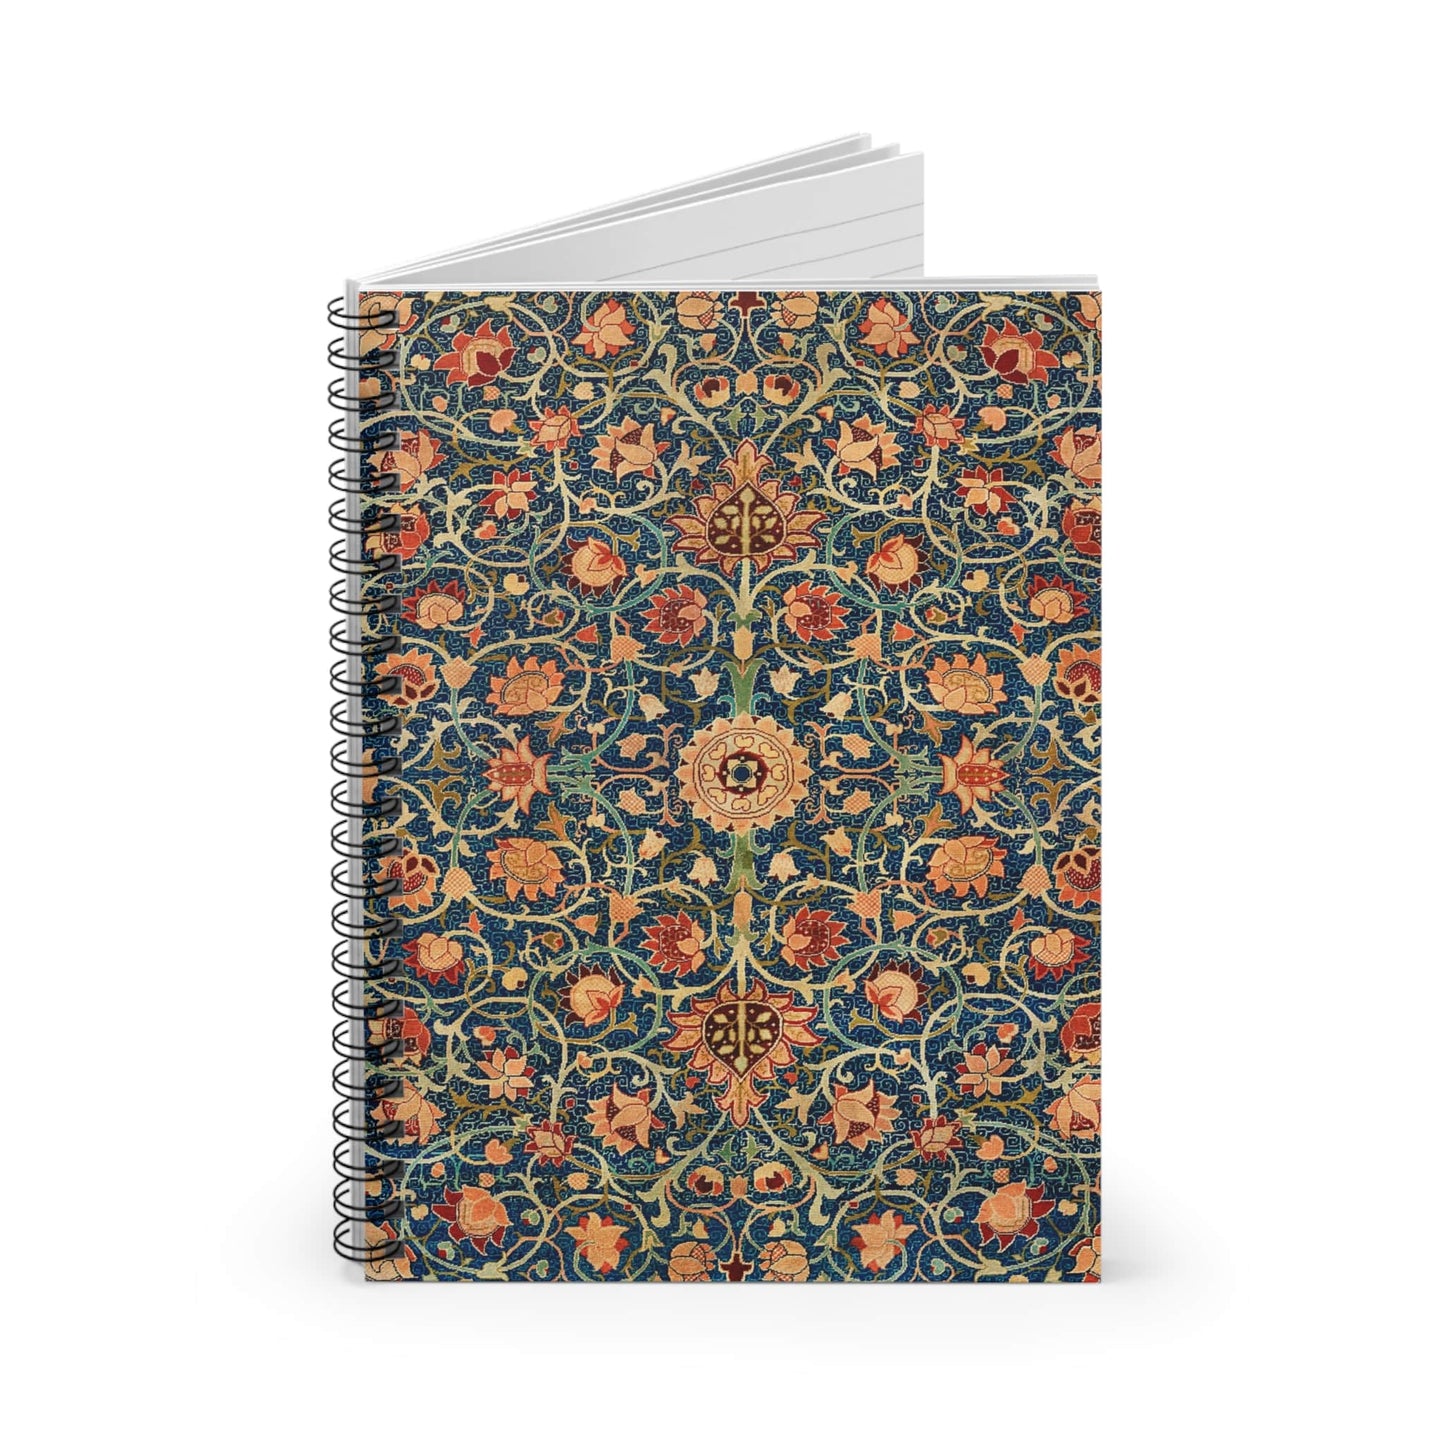 Aesthetic Floral Spiral Notebook Standing up on White Desk